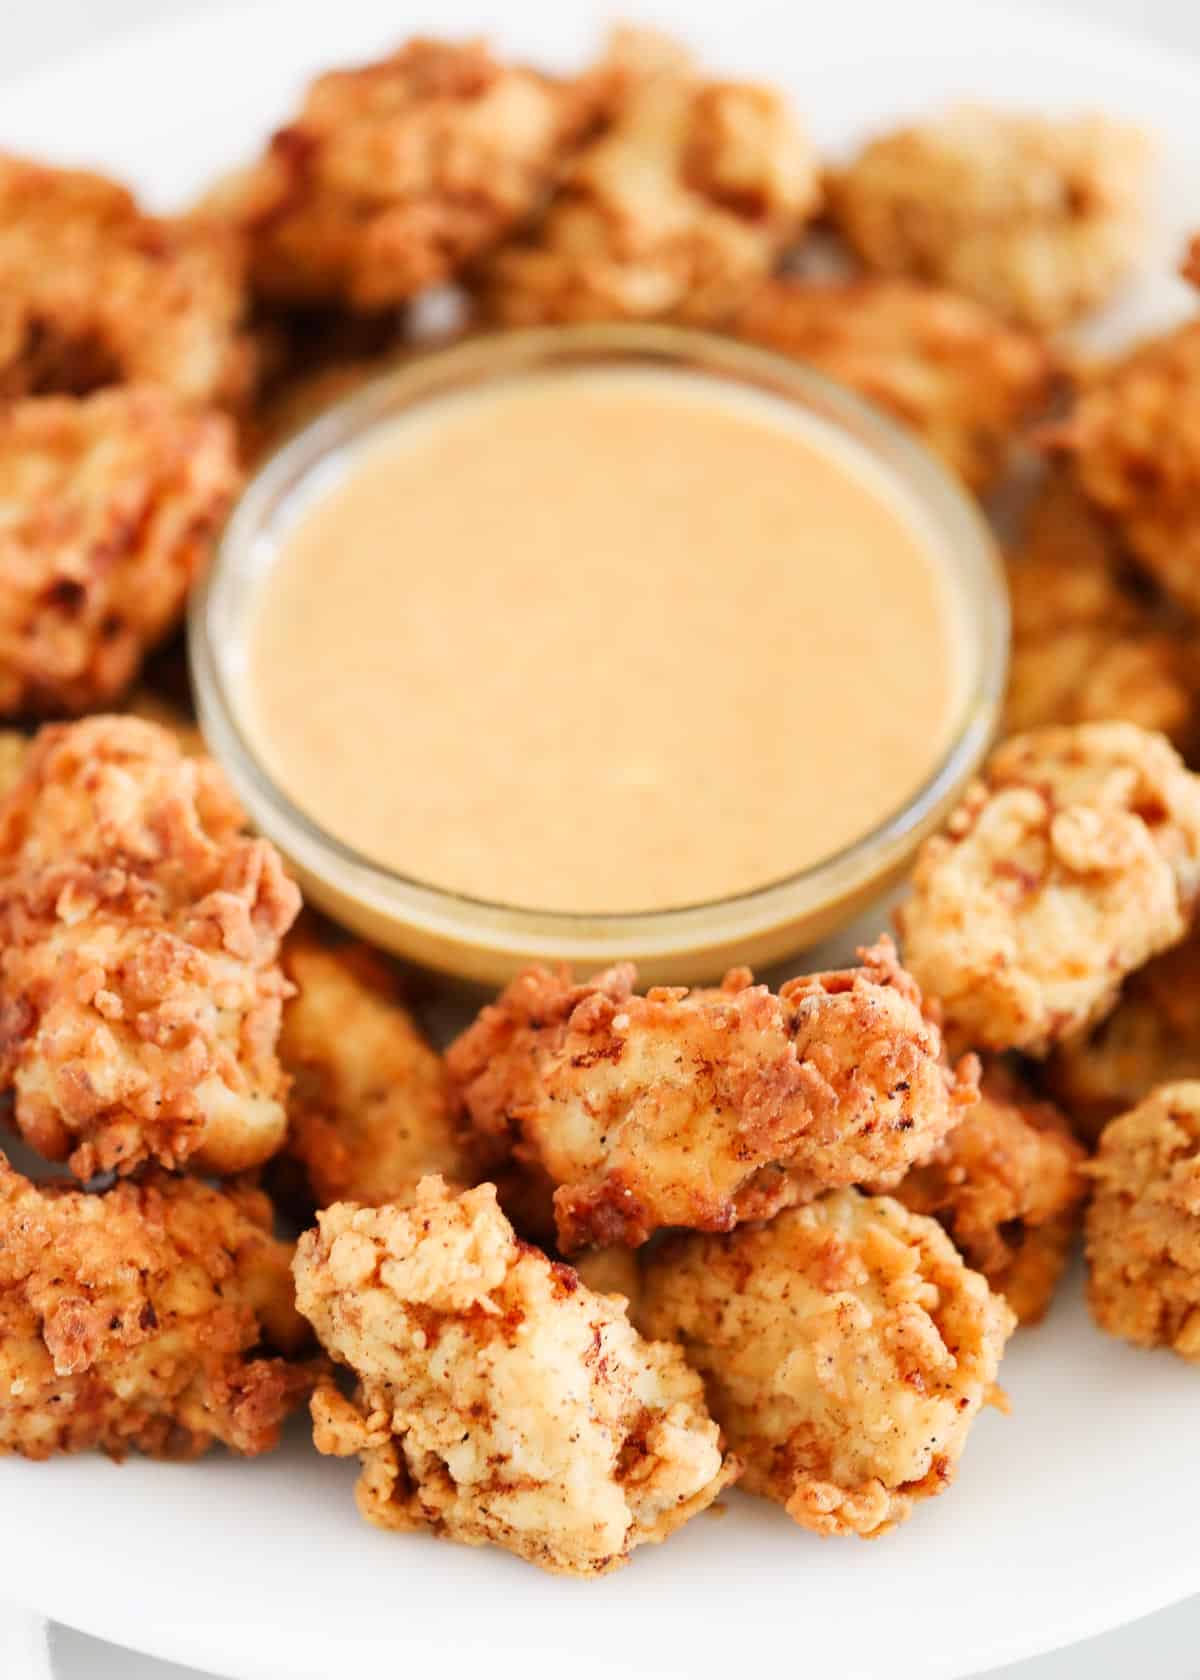 Chick fil a nuggets on white plate with sauce.